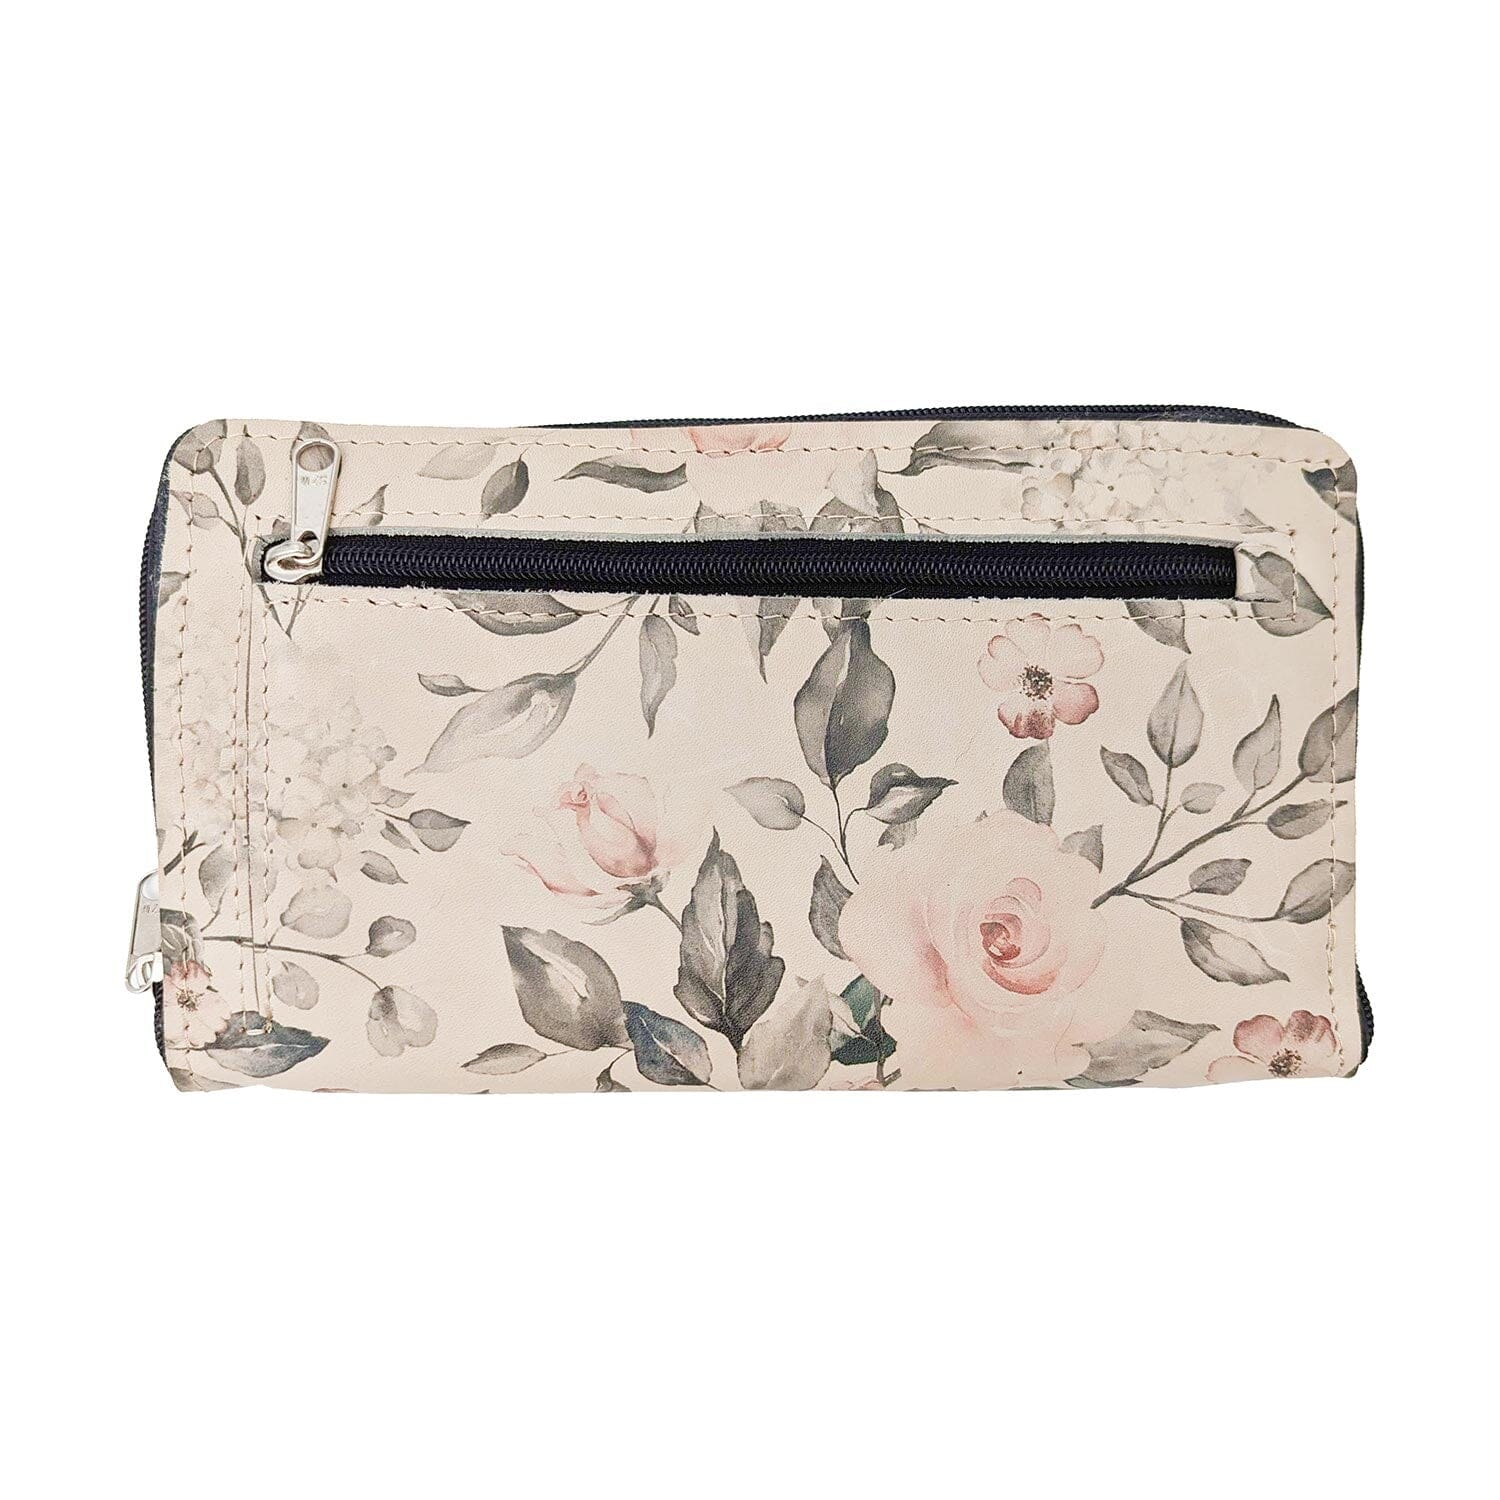 Haritons Urban Ivory Printed Leather Ladies Travel Wallet Wallets Haritons Rose Garden 